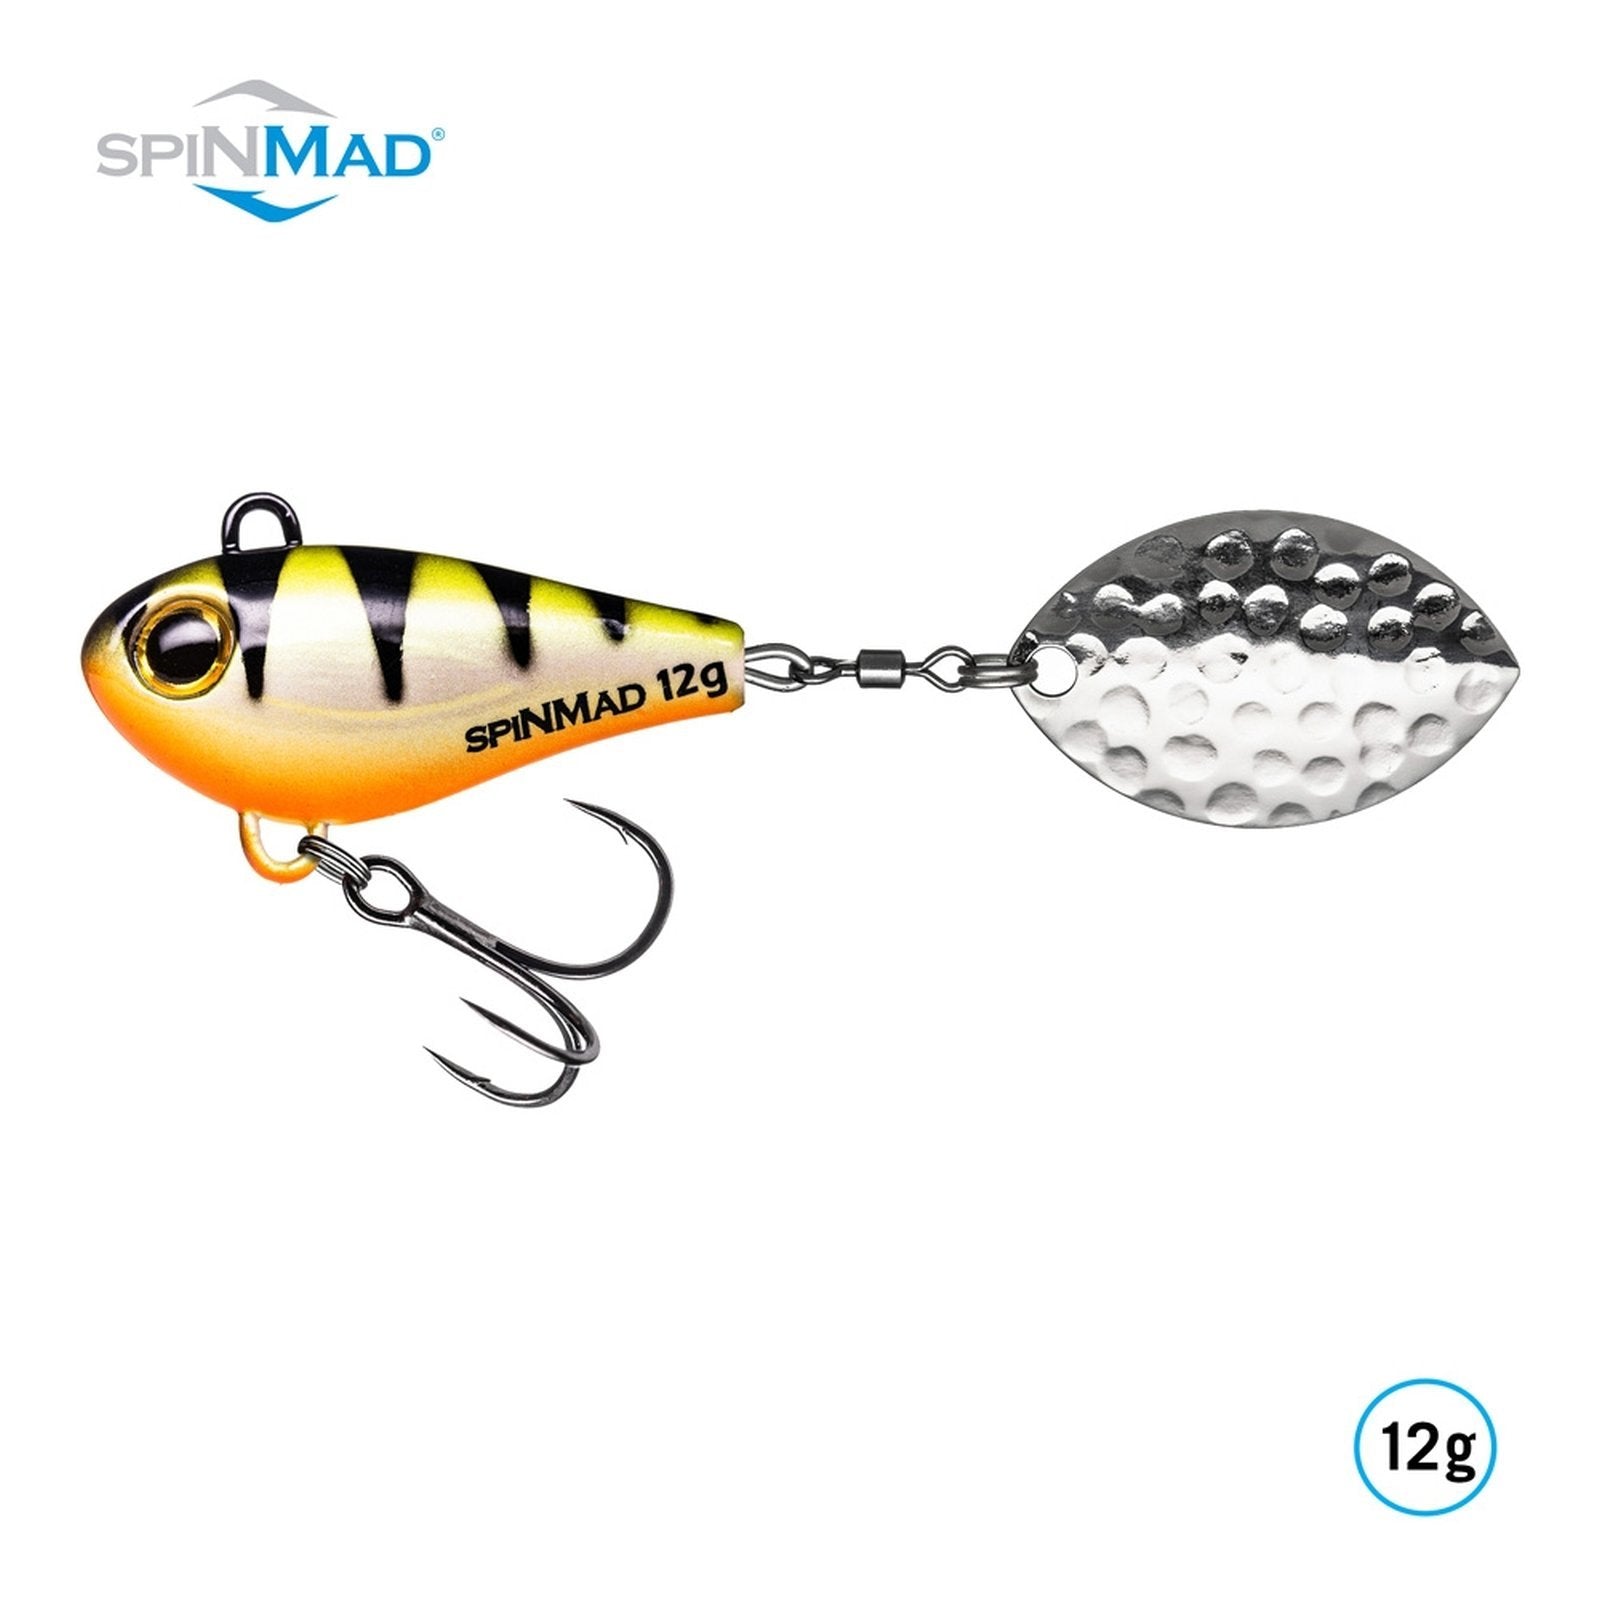 Lieblingskoeder SpinMad Jigmaster Farbe Charly 12 g